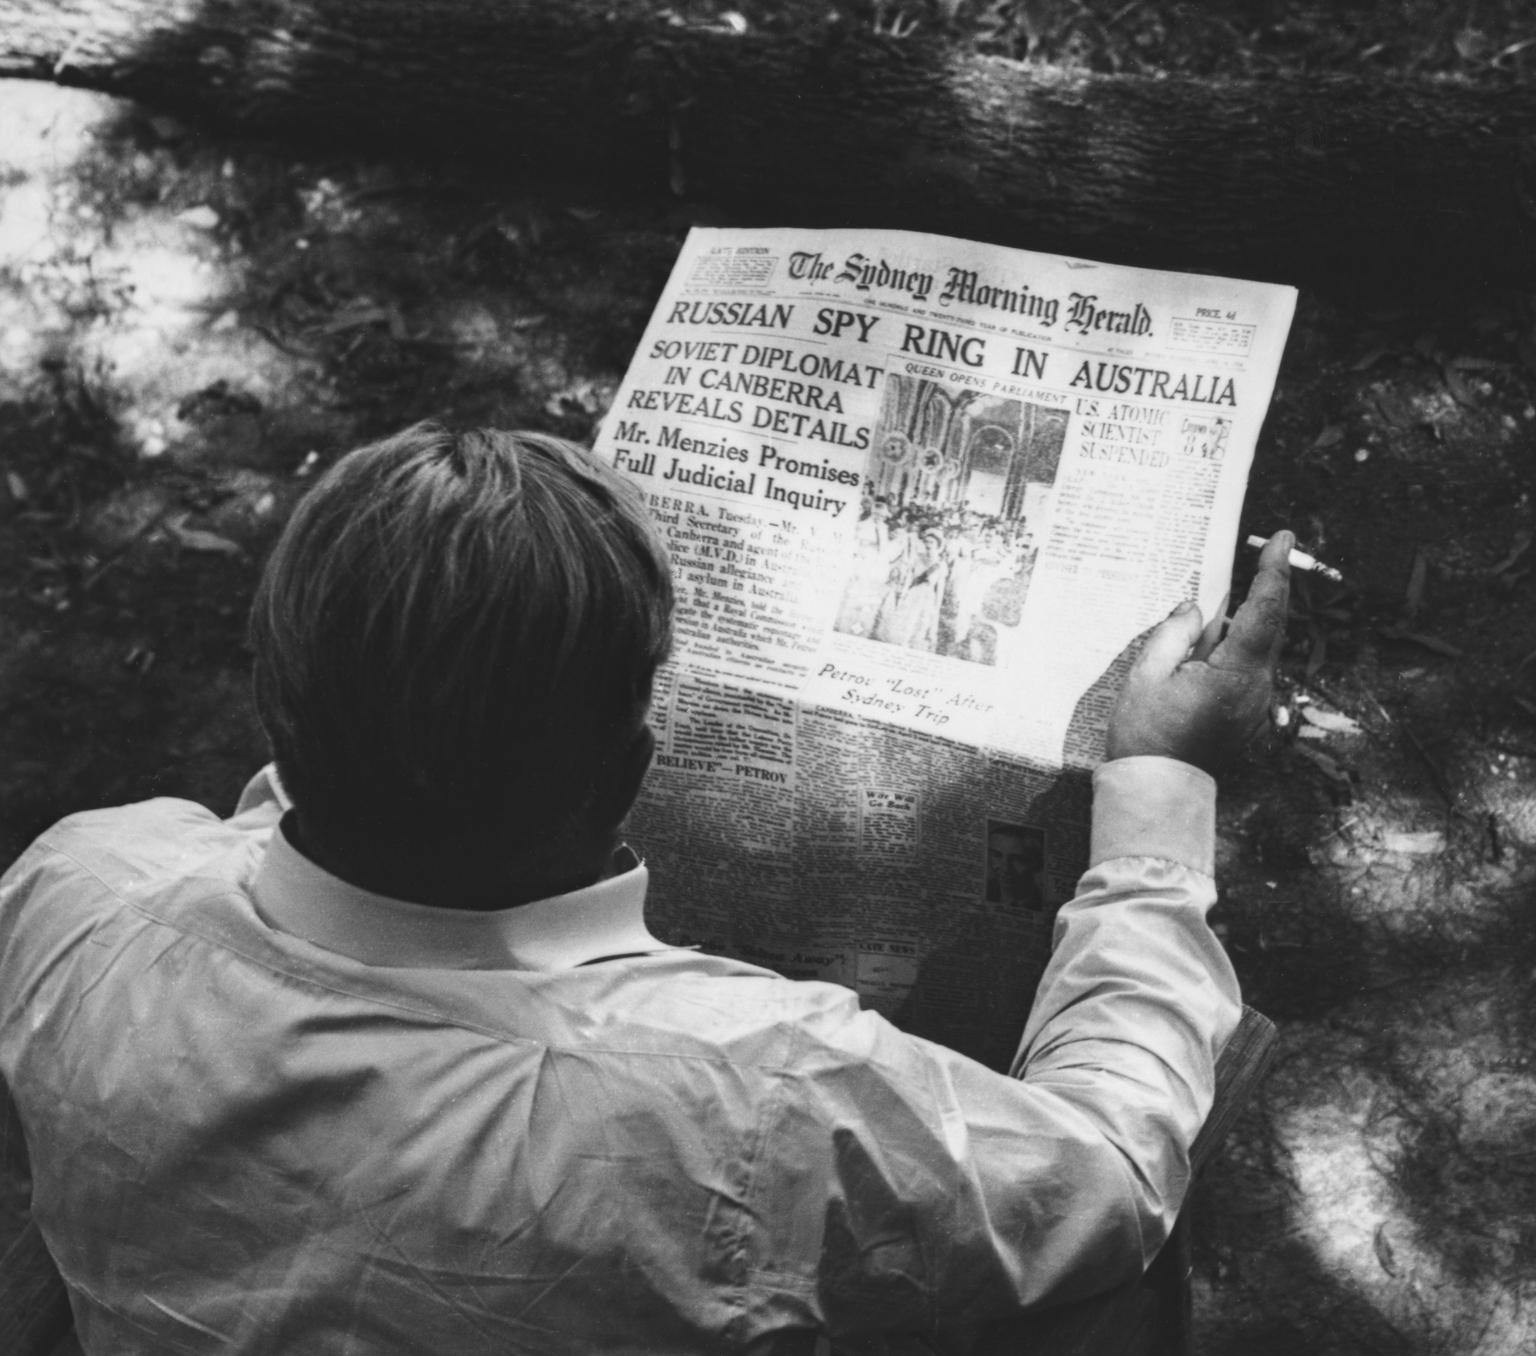 A man in a shirt and holding a cigarette in his right hand is shown from behind holding a newspaper - a copy of the Sydney Morning Herald. The front page is visible over this shoulder and the headline says "Russian spy ring in Australia'.